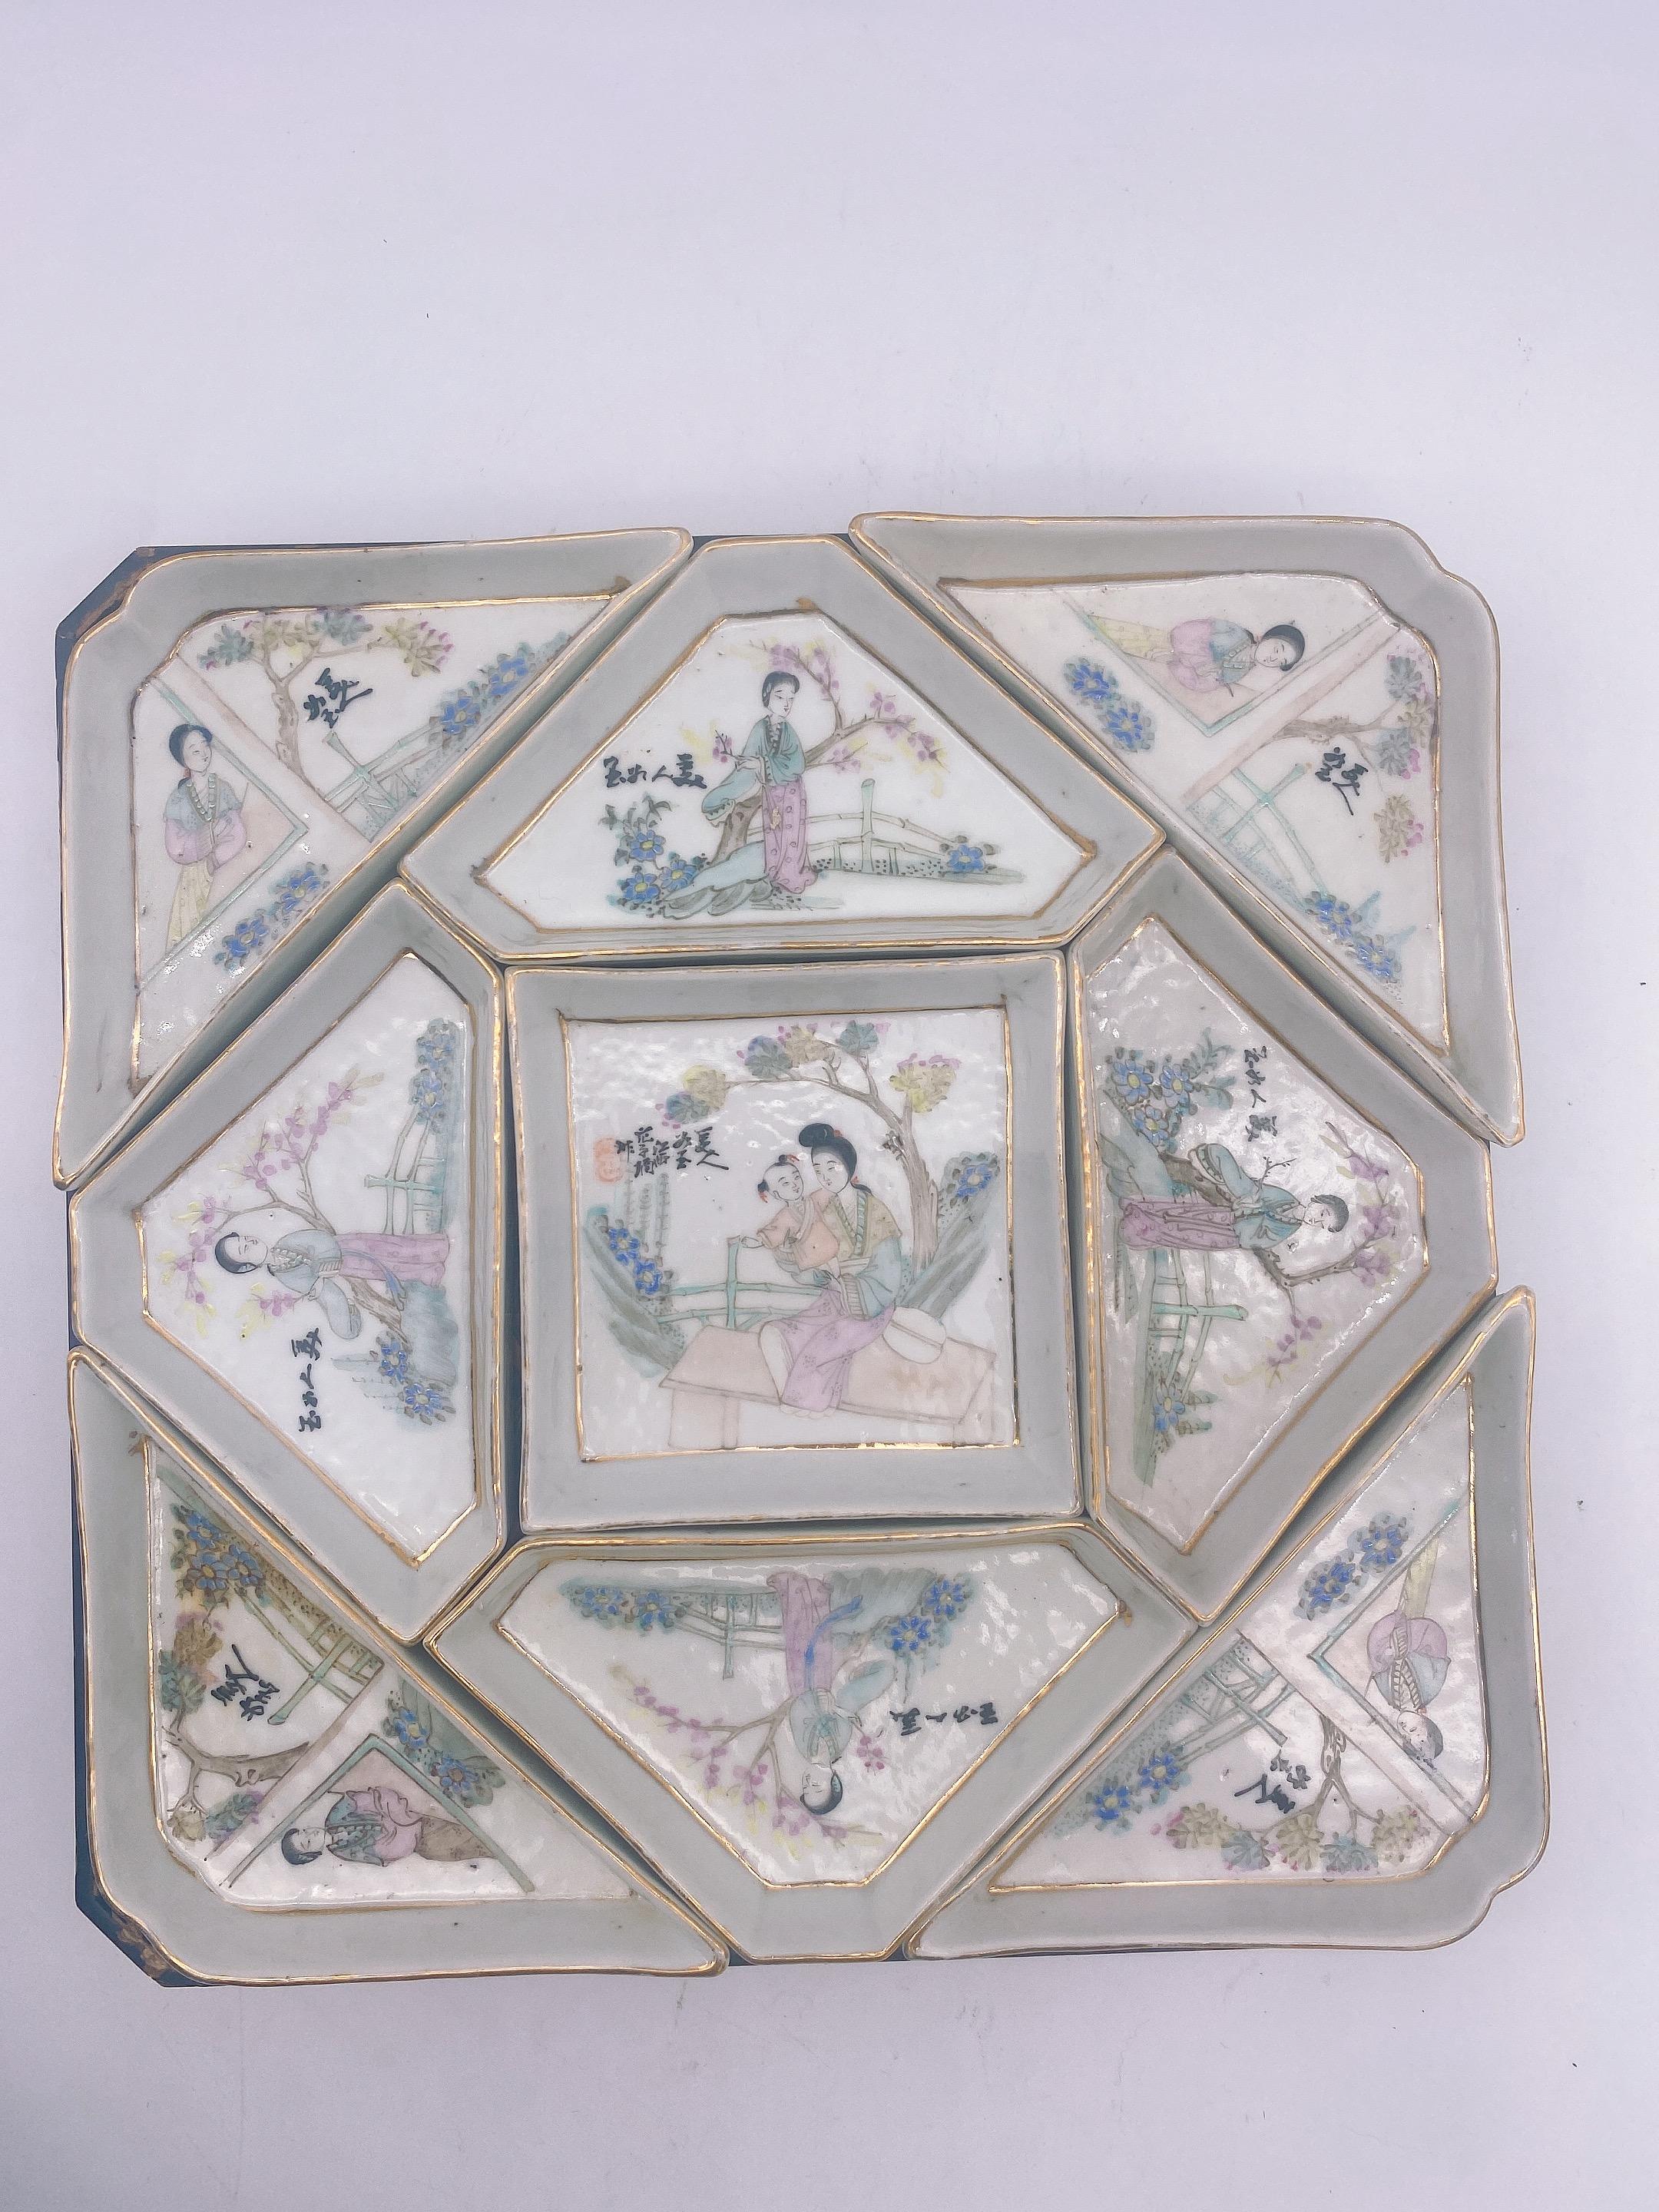 Qing dynasty an antique important Chinese famille rose porcelain 9 pieces sweetmeat dishes set with very beautiful box, hand painted. excellent condition, every piece with meirenruyu in chinese , the middle square piece with Measures: 10.5” x 10.5 x